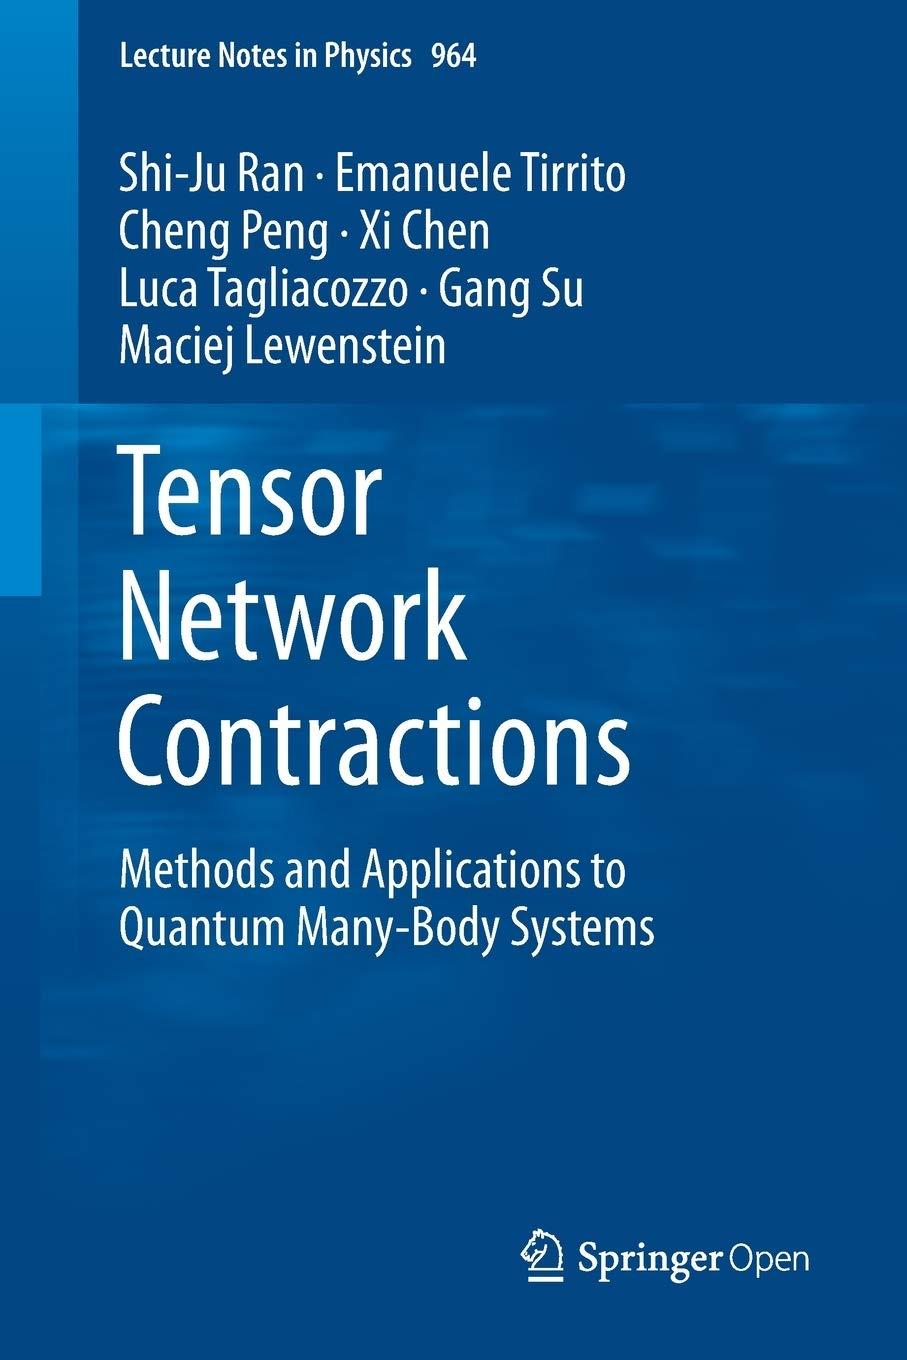 tensor network contractions methods and applications to quantum many body systems 1st edition shi-ju ran,